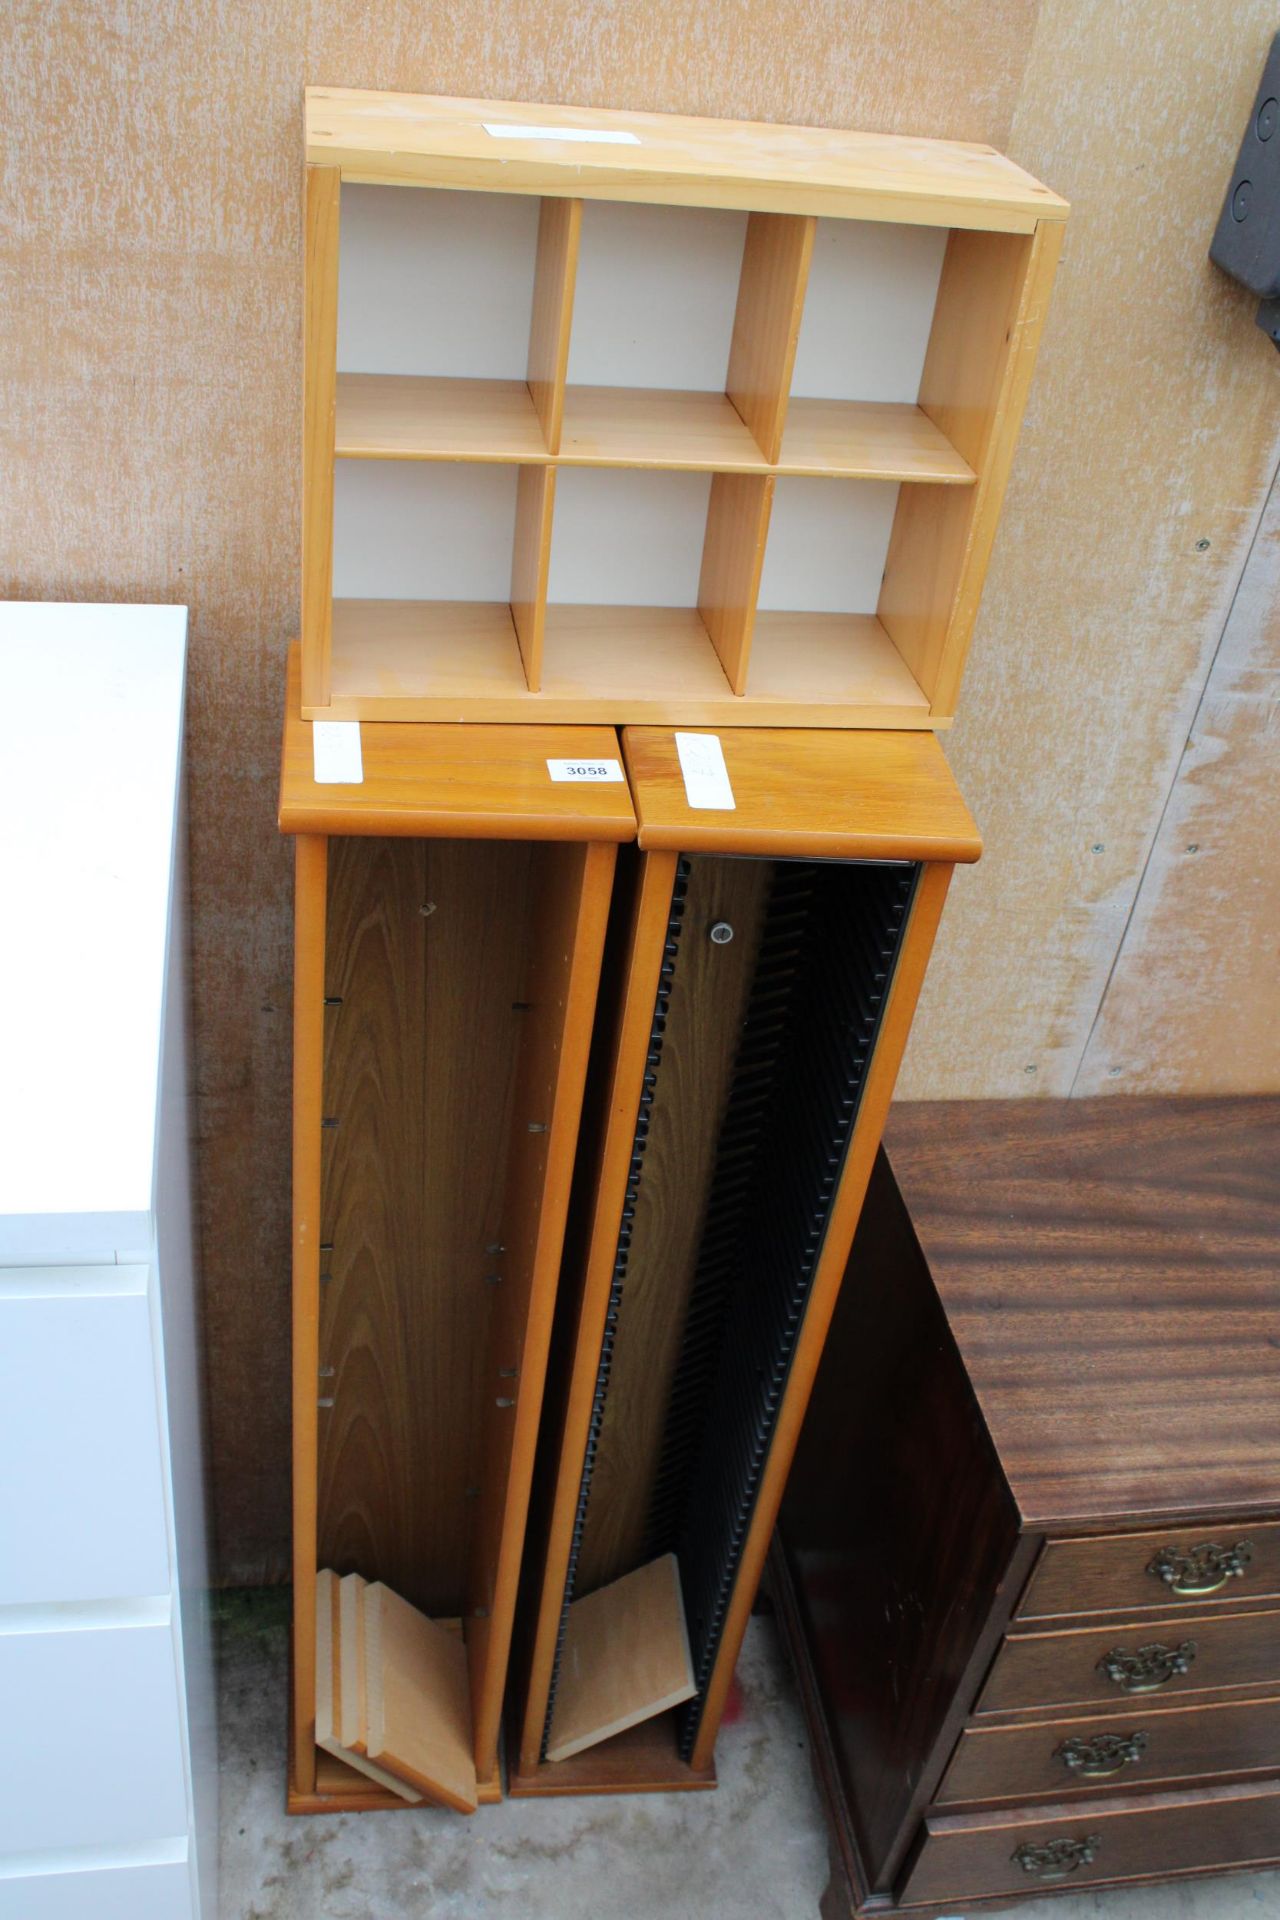 TWO CD RACKS AND A SMALL OPEN SHELVING UNIT